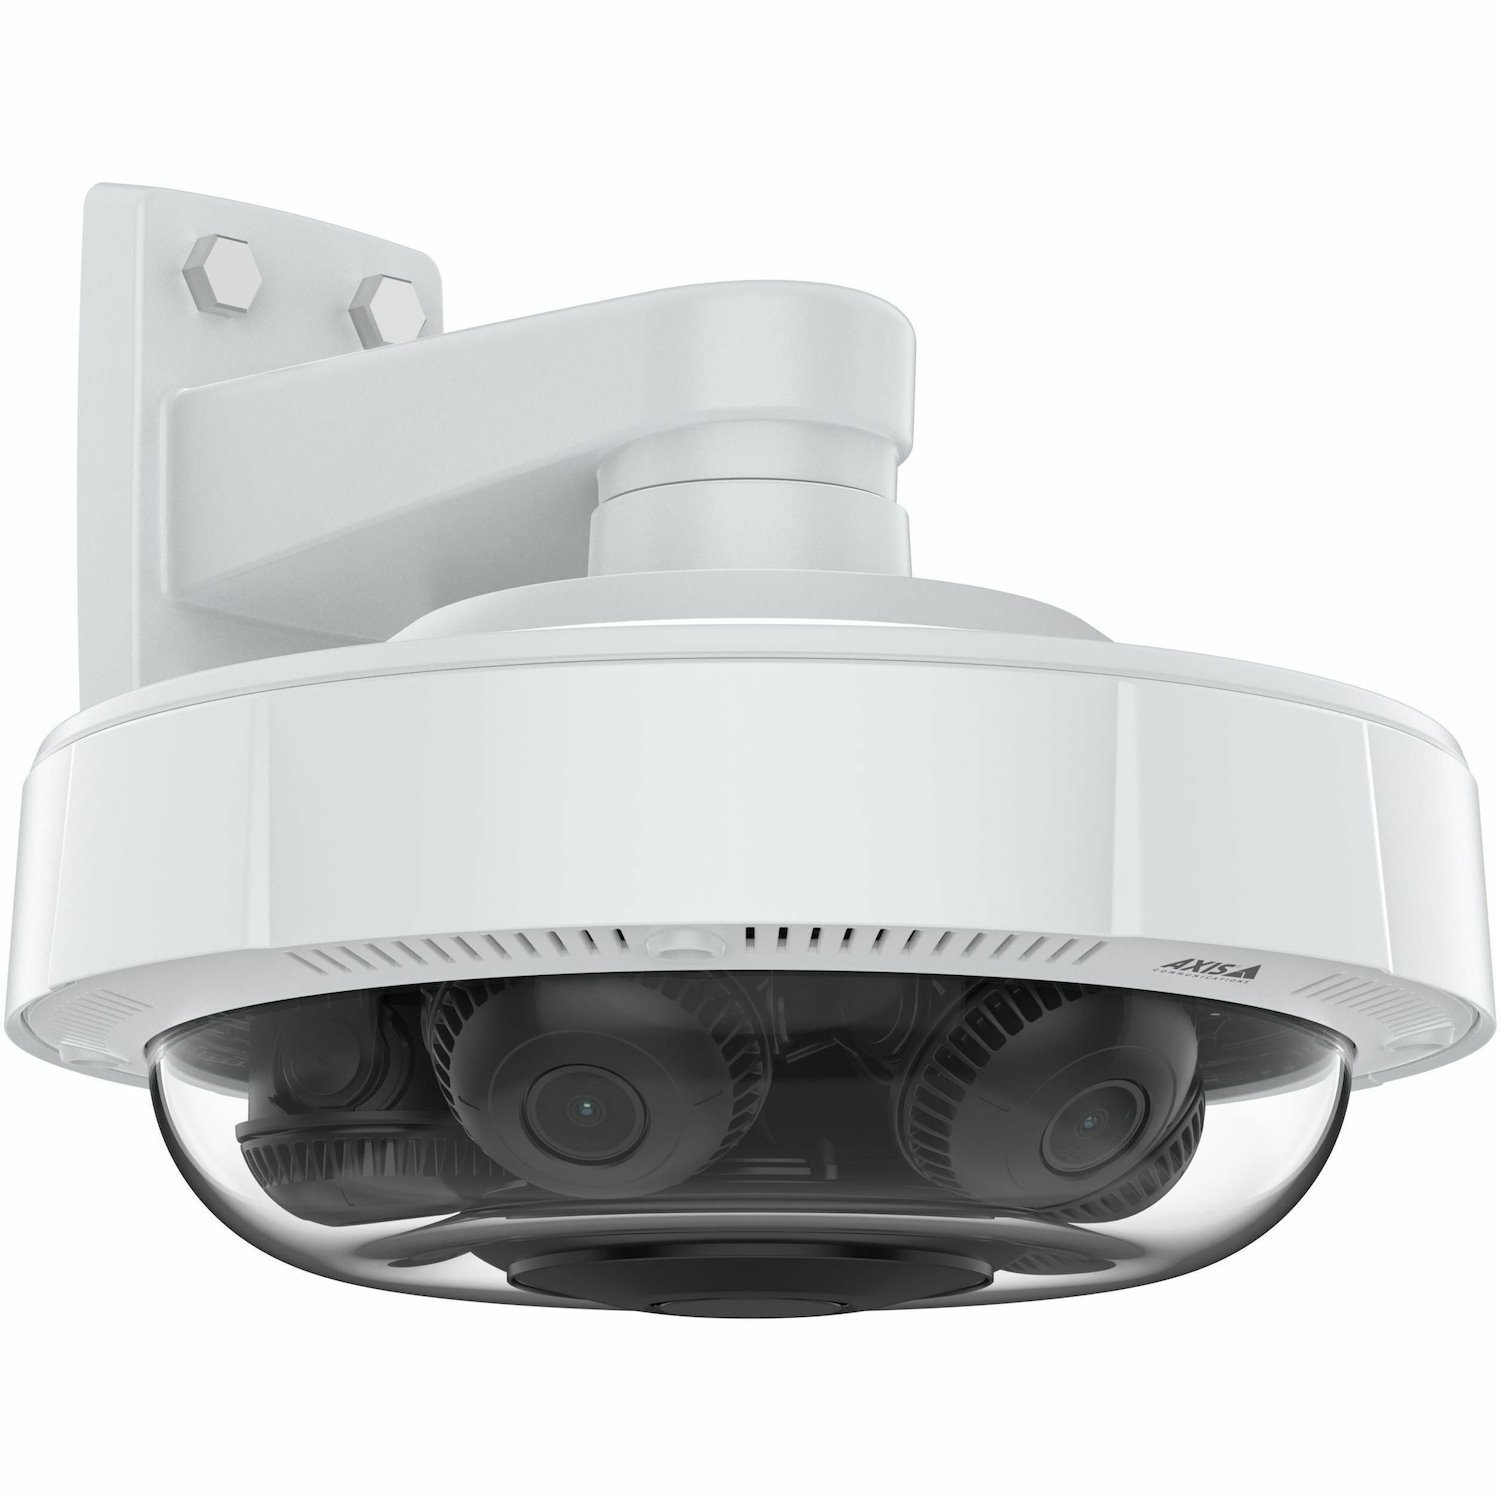 AXIS Panoramic P3737-PLE 5 Megapixel 2K Network Camera - Color - White - TAA Compliant